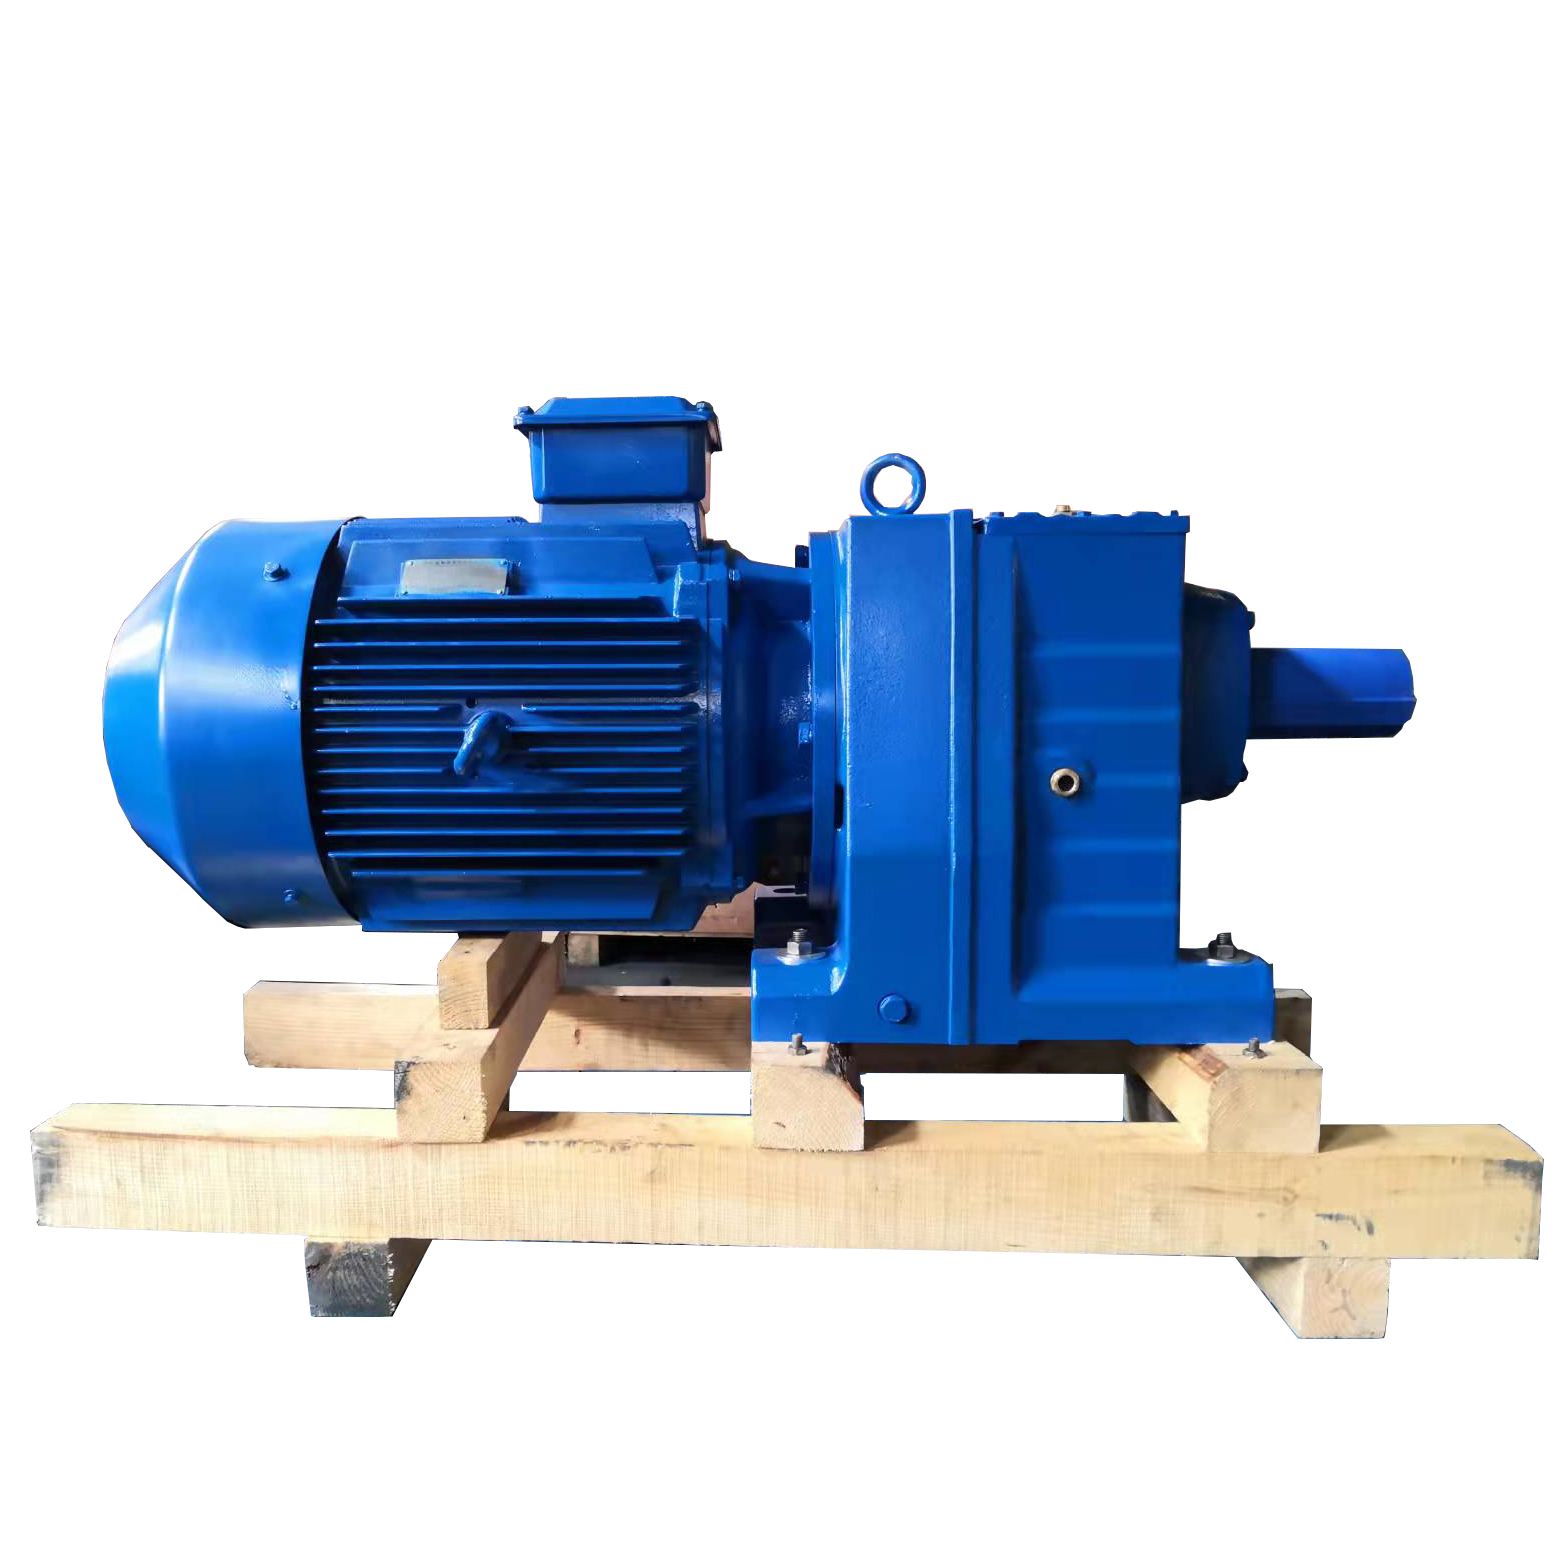 EVERGEAR DRIVE Inline shaft 3 phase gear motor 2hp with clatch R series coaxial speed reducer